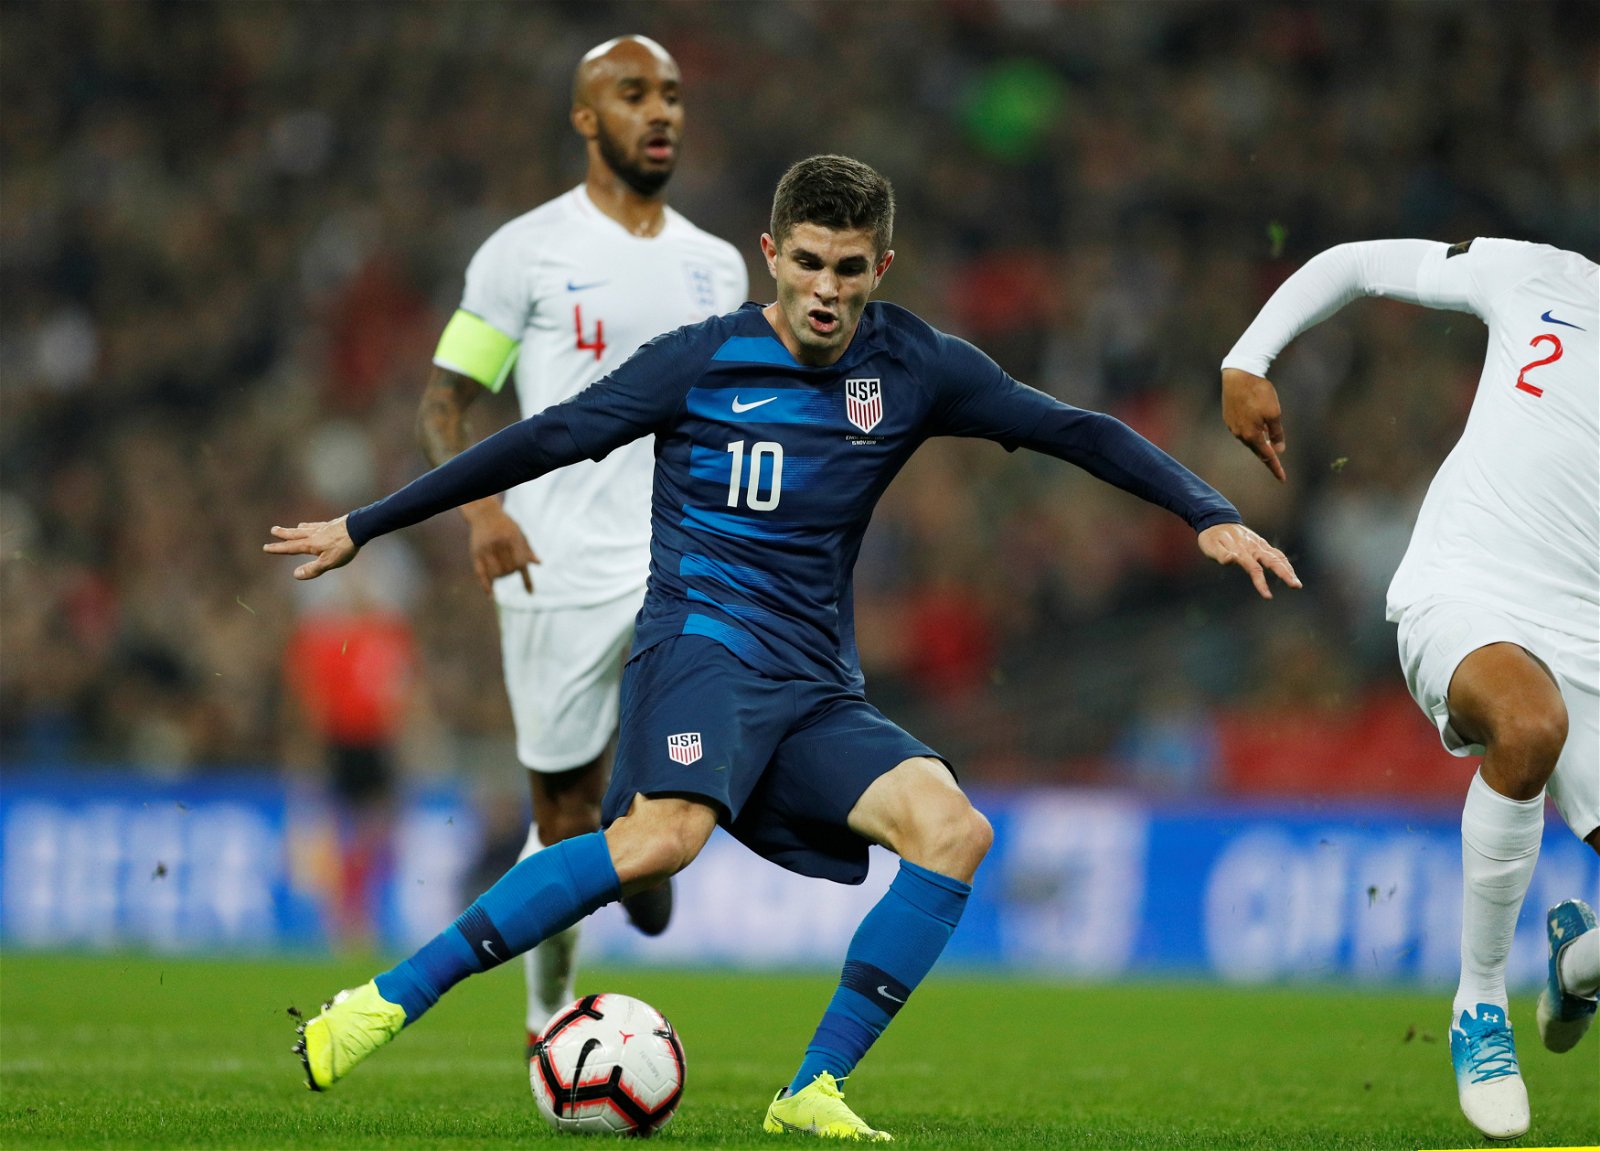 Chelsea on the brink of signing Christian Pulisic